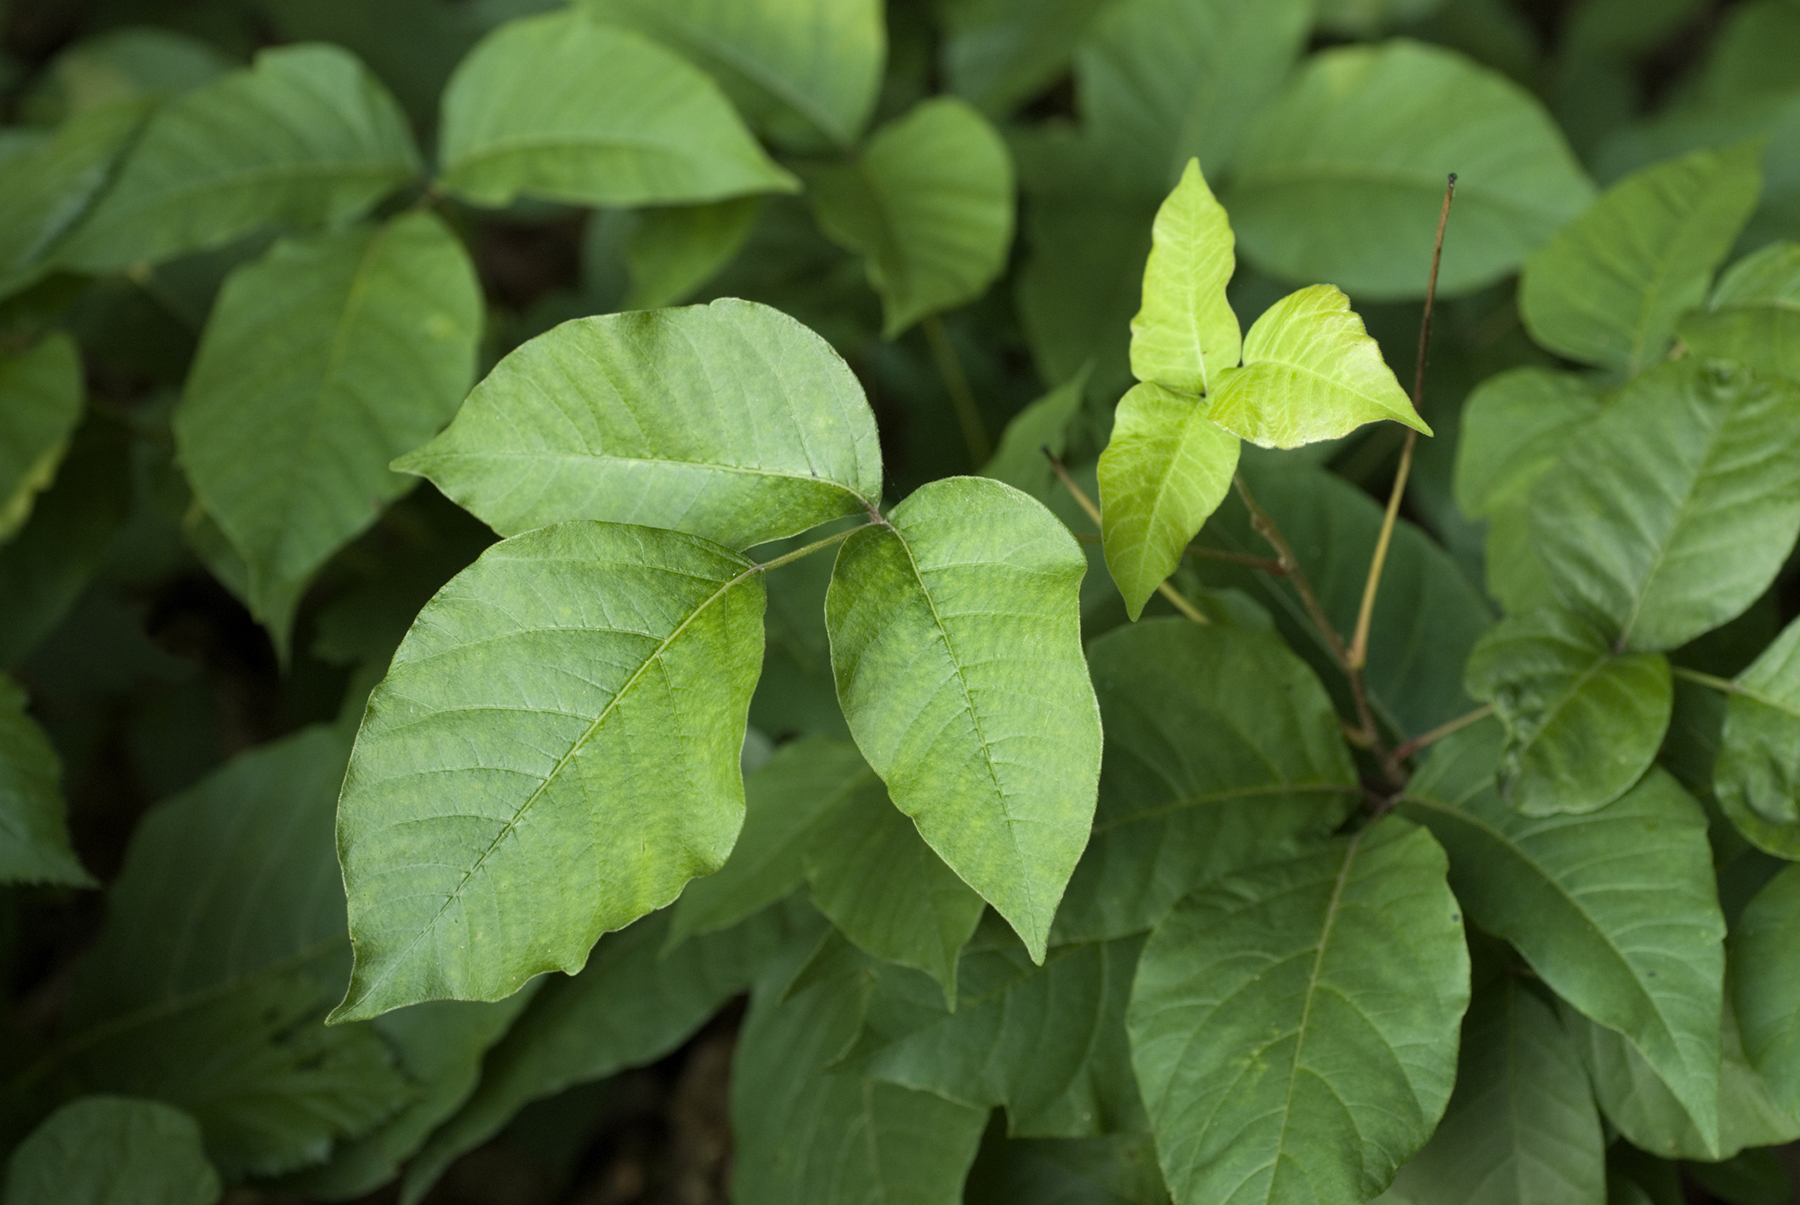 Mother Nature’s wrath: Poison ivy, poison oak and poison sumac | Macomb ...